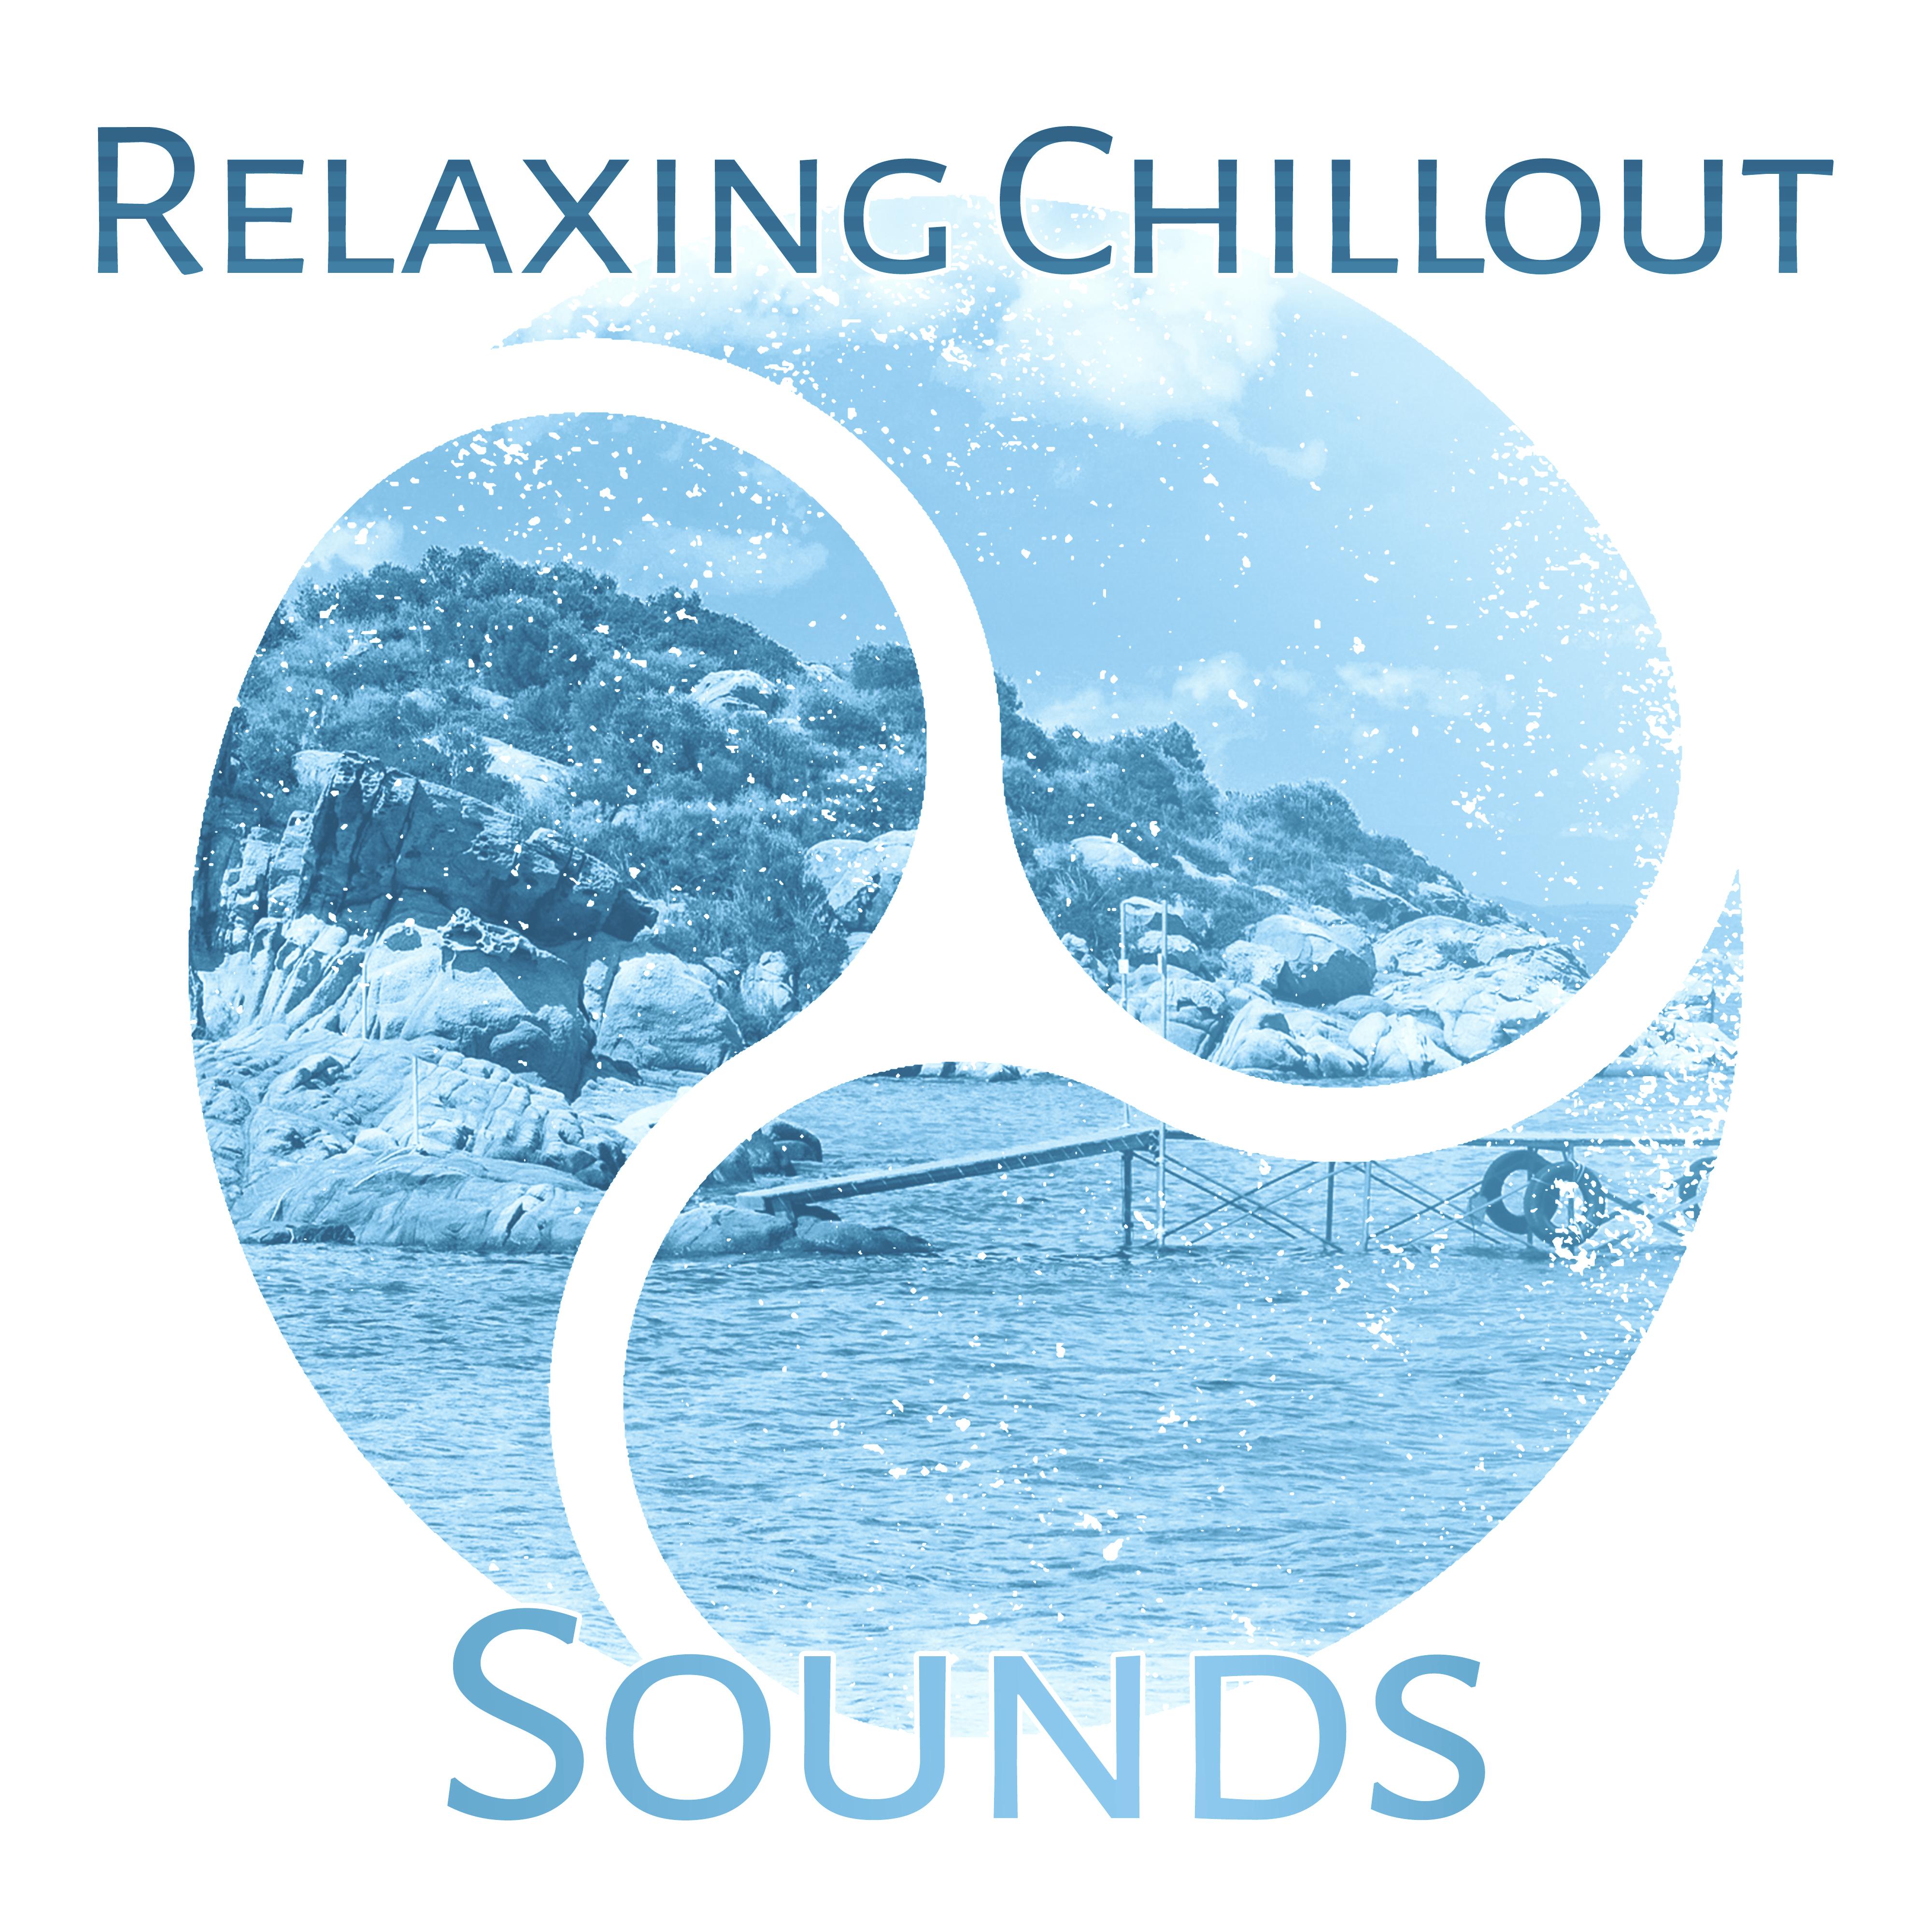 Relaxing Chillout Sounds – Music to Rest, Soft Sounds, Beach Lounge, Ibiza Chill Out